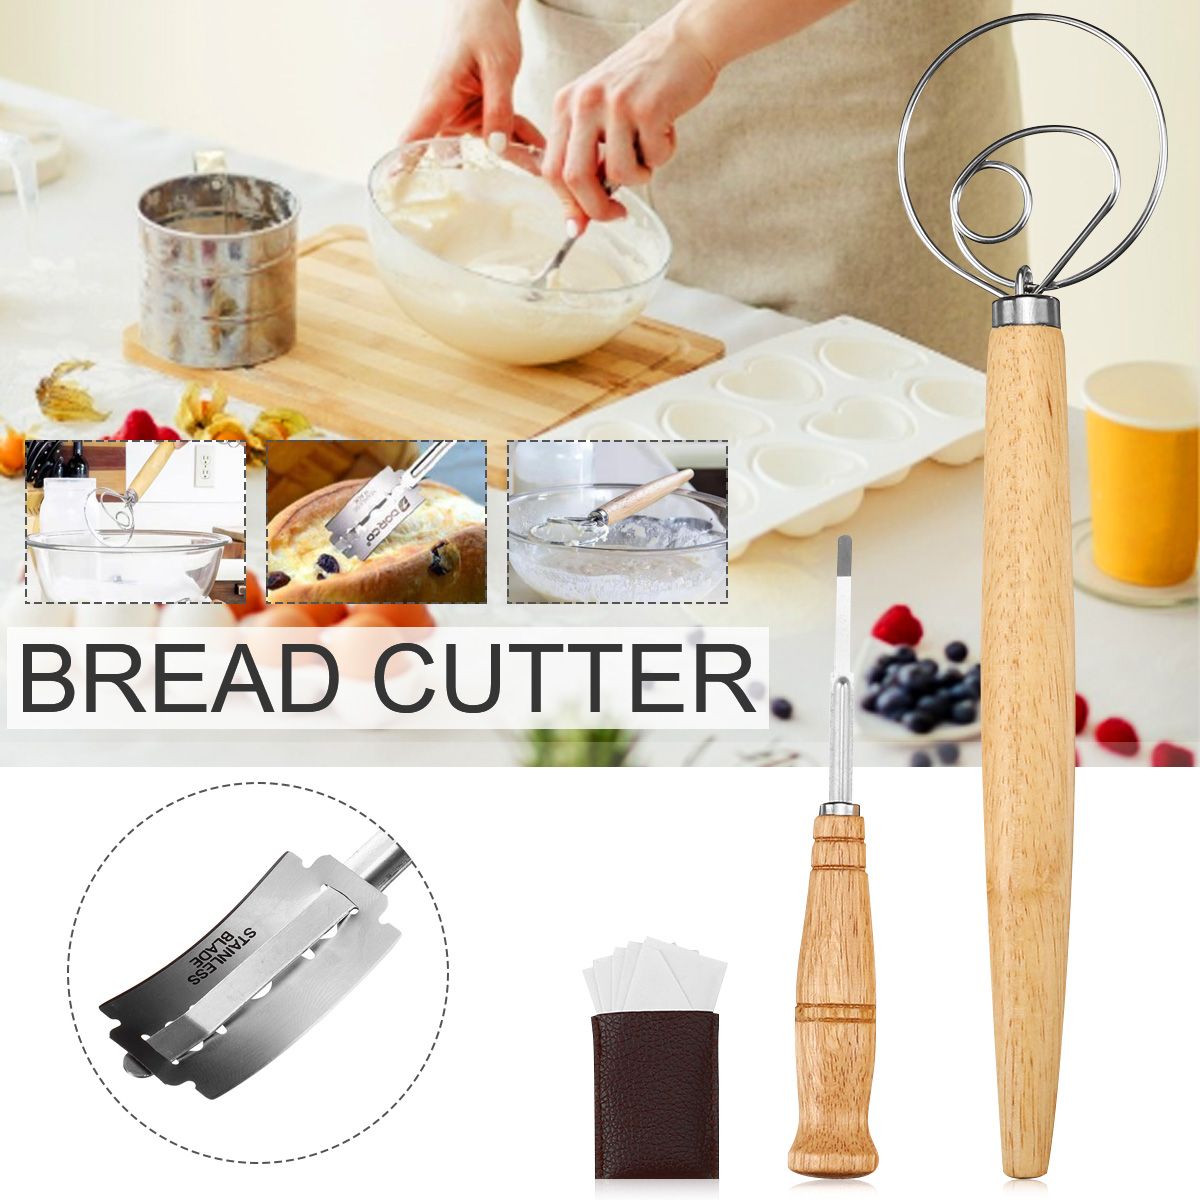 Dough-Whisk-Hand-Mixer-Bread-Curved-Blade-Cutter-Beater-Baking-Kitchen-Tool-1720930